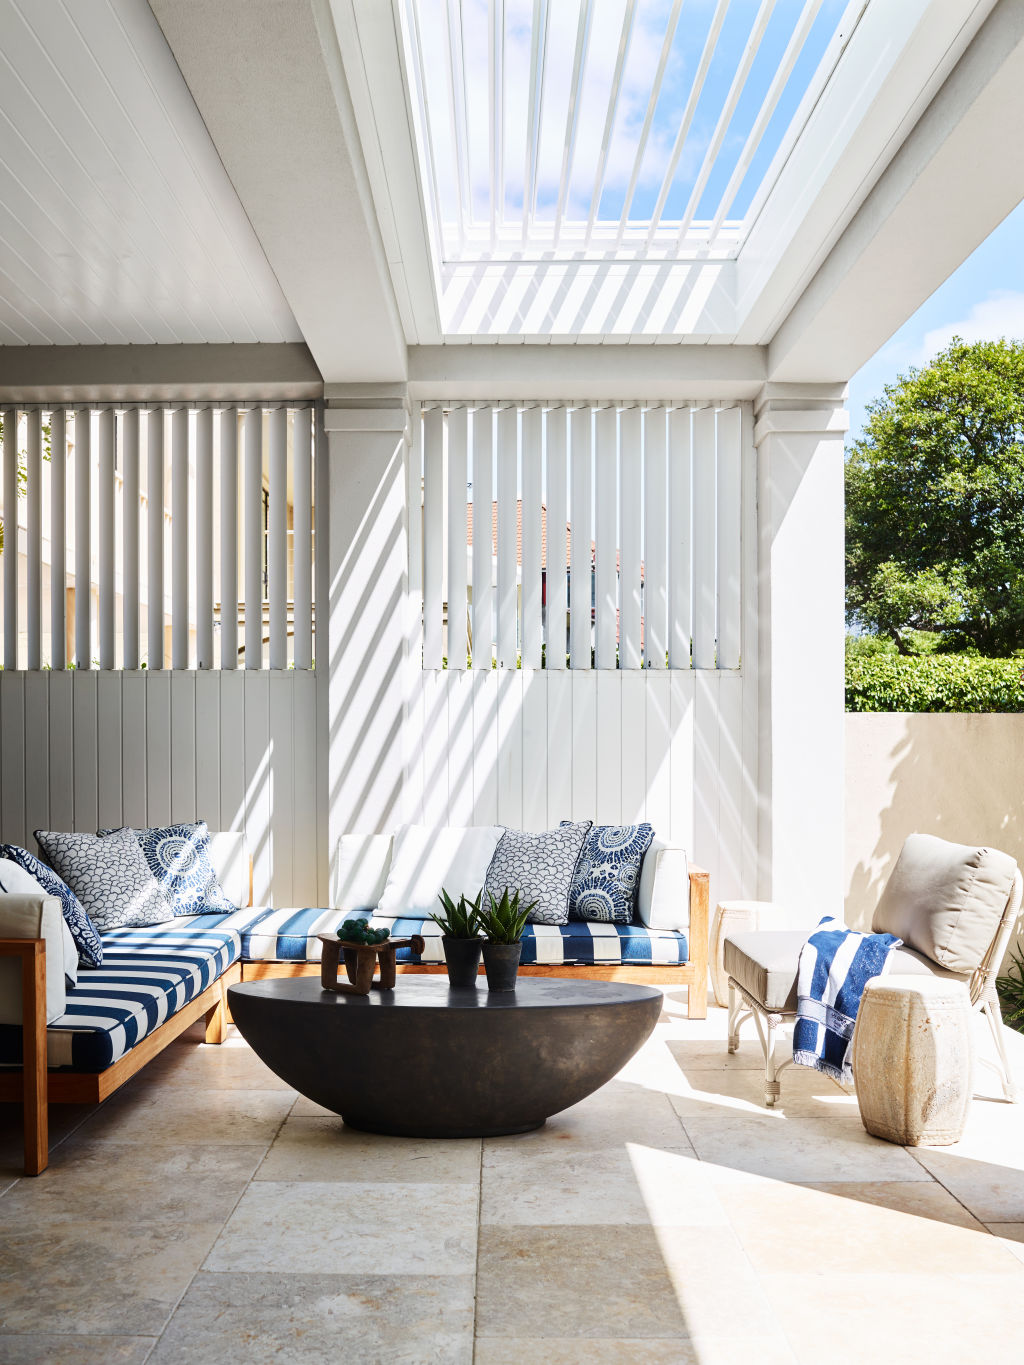 The garden has evolved into the outdoor room, with sophisticated furnishings. Photo: Anson Smart.